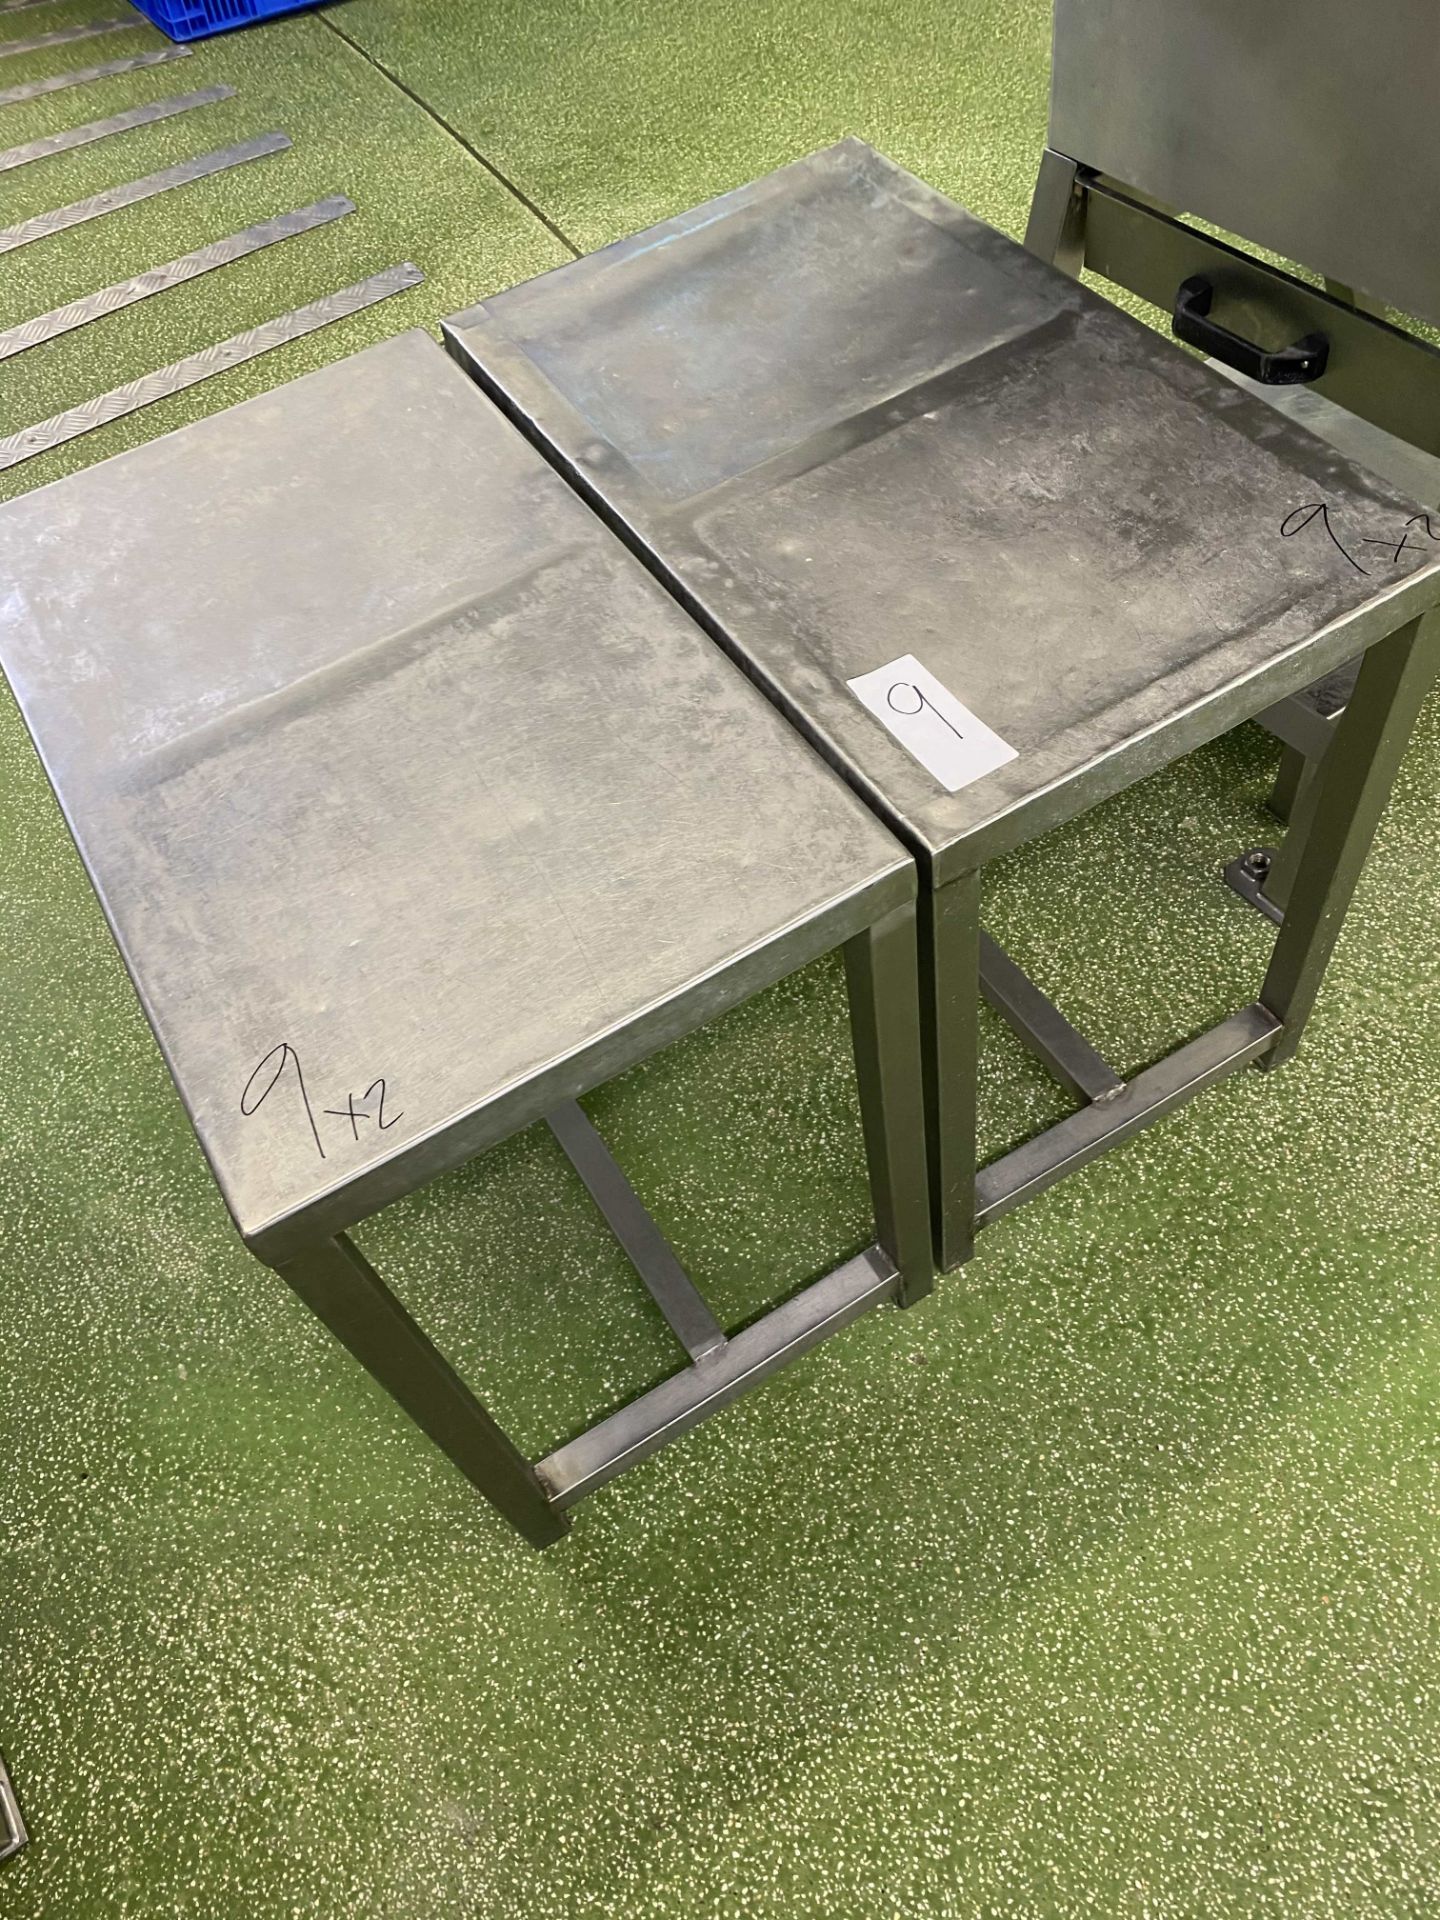 2 X S/S TABLES. - Image 2 of 2